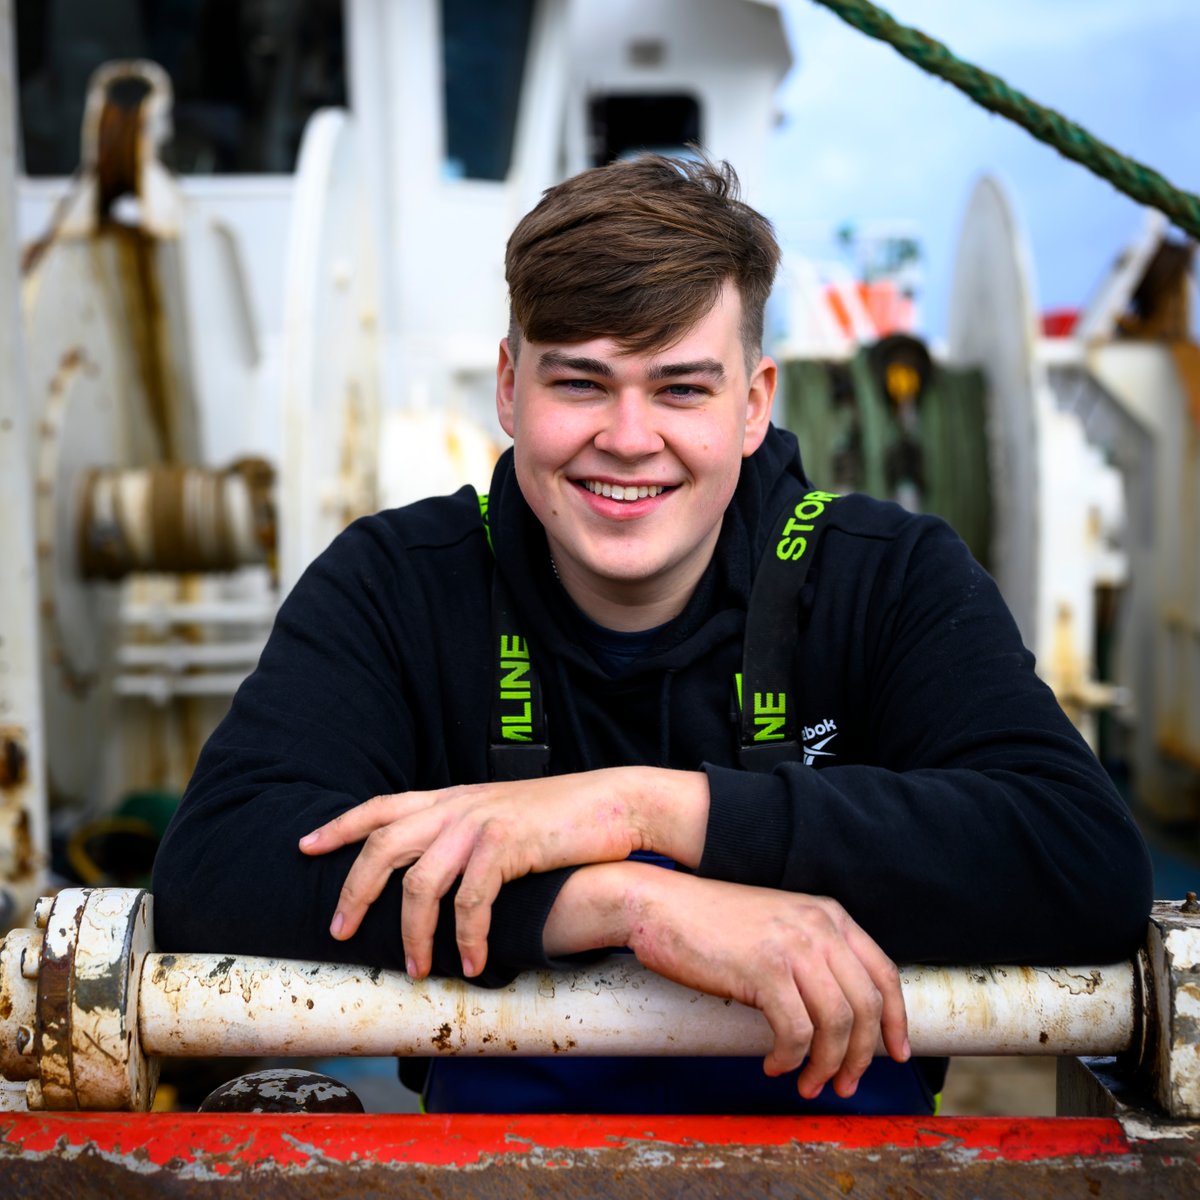 We've been delighted to have Nicol featured as part of our #PrideInTheSeas campaign. His commitment to sustainability and passion for the family tradition shines a light on the essential role of young fishermen in shaping a responsible future 👉 loom.ly/fvNAG6c